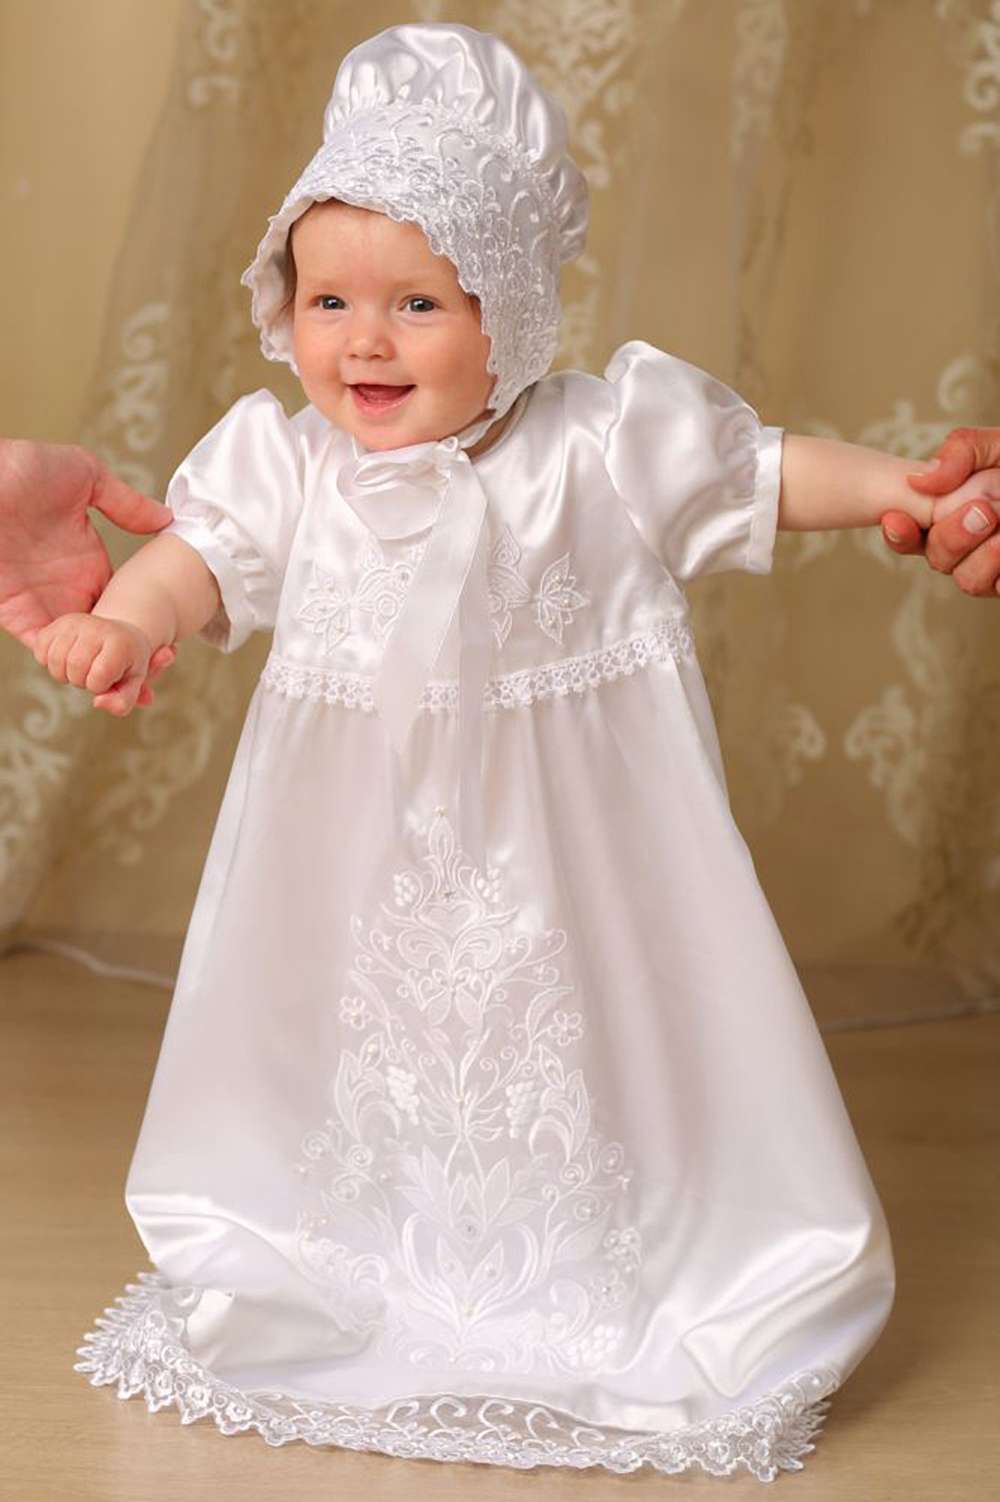 Christening gown (The Tree of Life)